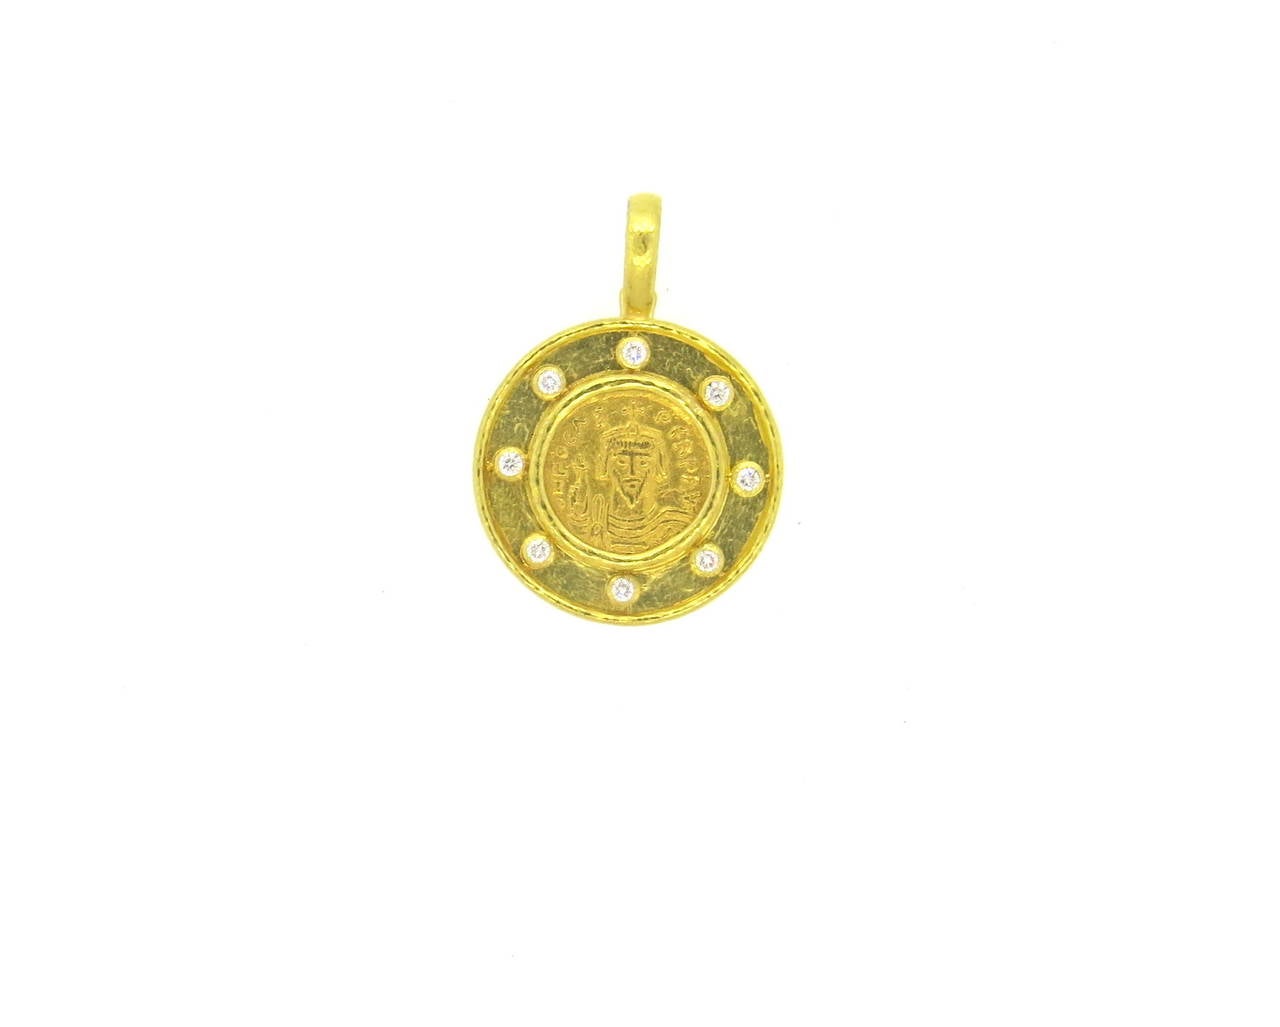 Elizabeth Locke One-Of-A-Kind Ancient Gold Byzantine Coin With Eight Diamonds Set In Flat Hammered Bezel With Clip Bale. 
19k yellow gold pendant enhancer, crafted by Elizabeth Locke, set with an 18mm ancient Byzantine coin, surrounded with